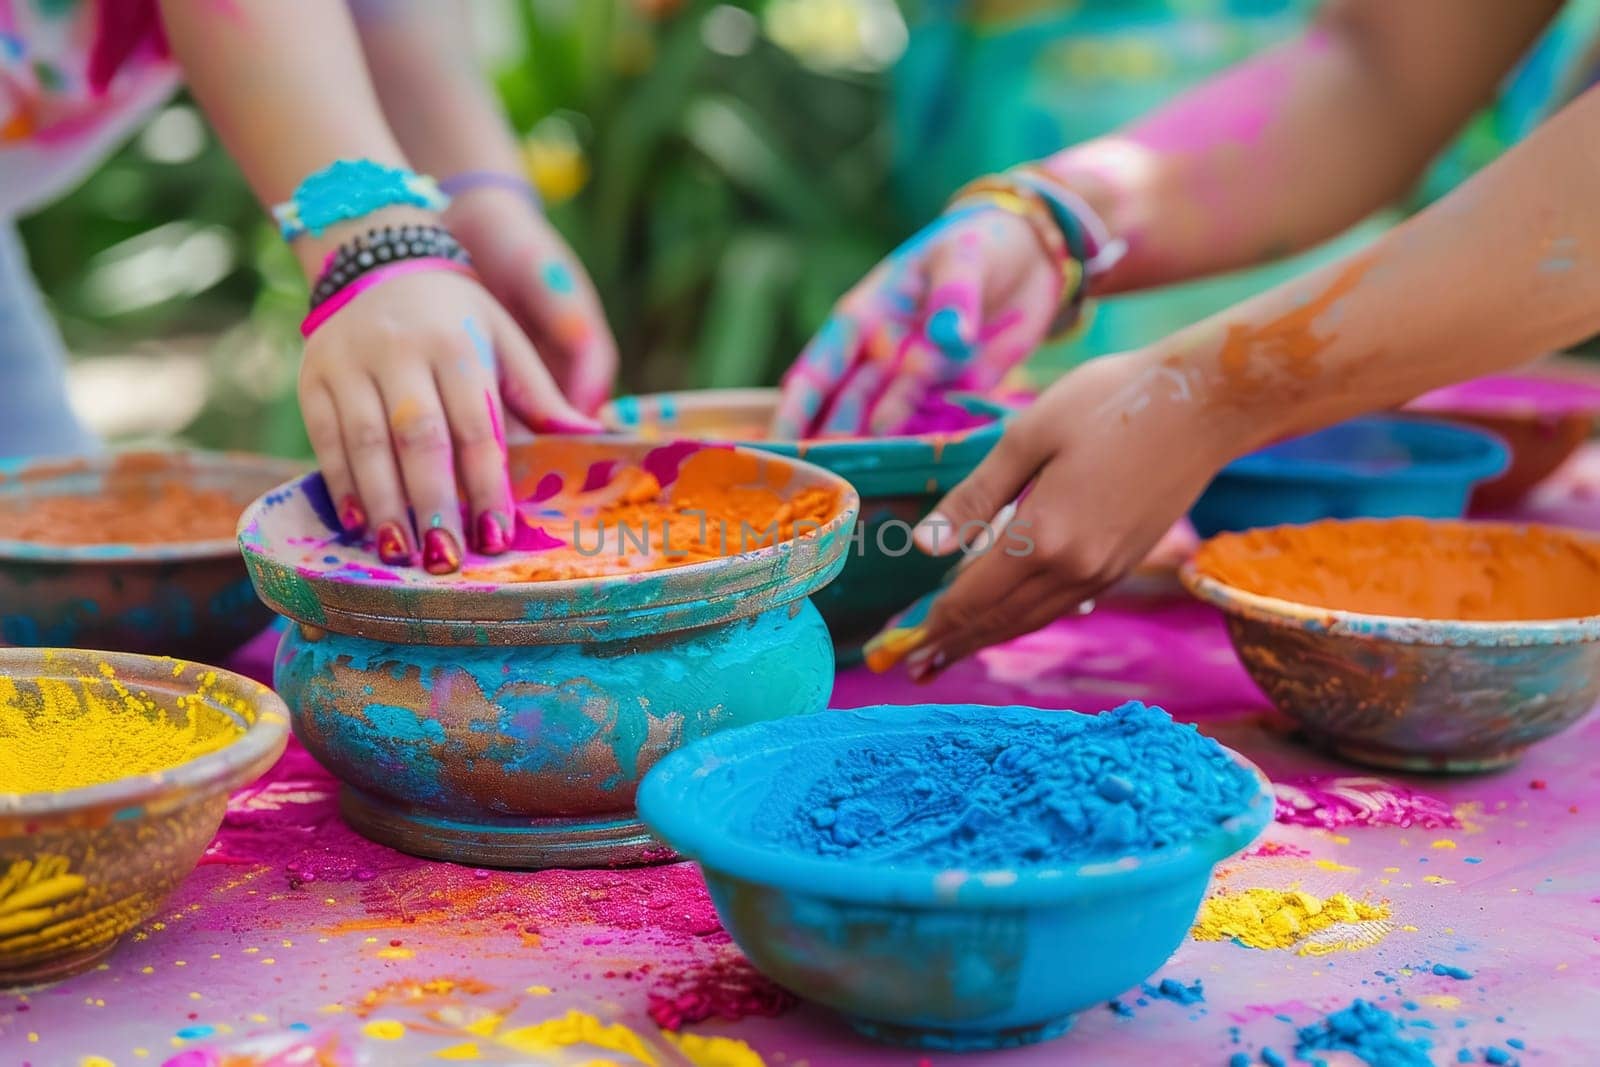 Open hands covered in vibrant Holi colors symbolize joy and playfulness. The rainbow of pigments adorns the skin with cultural celebration